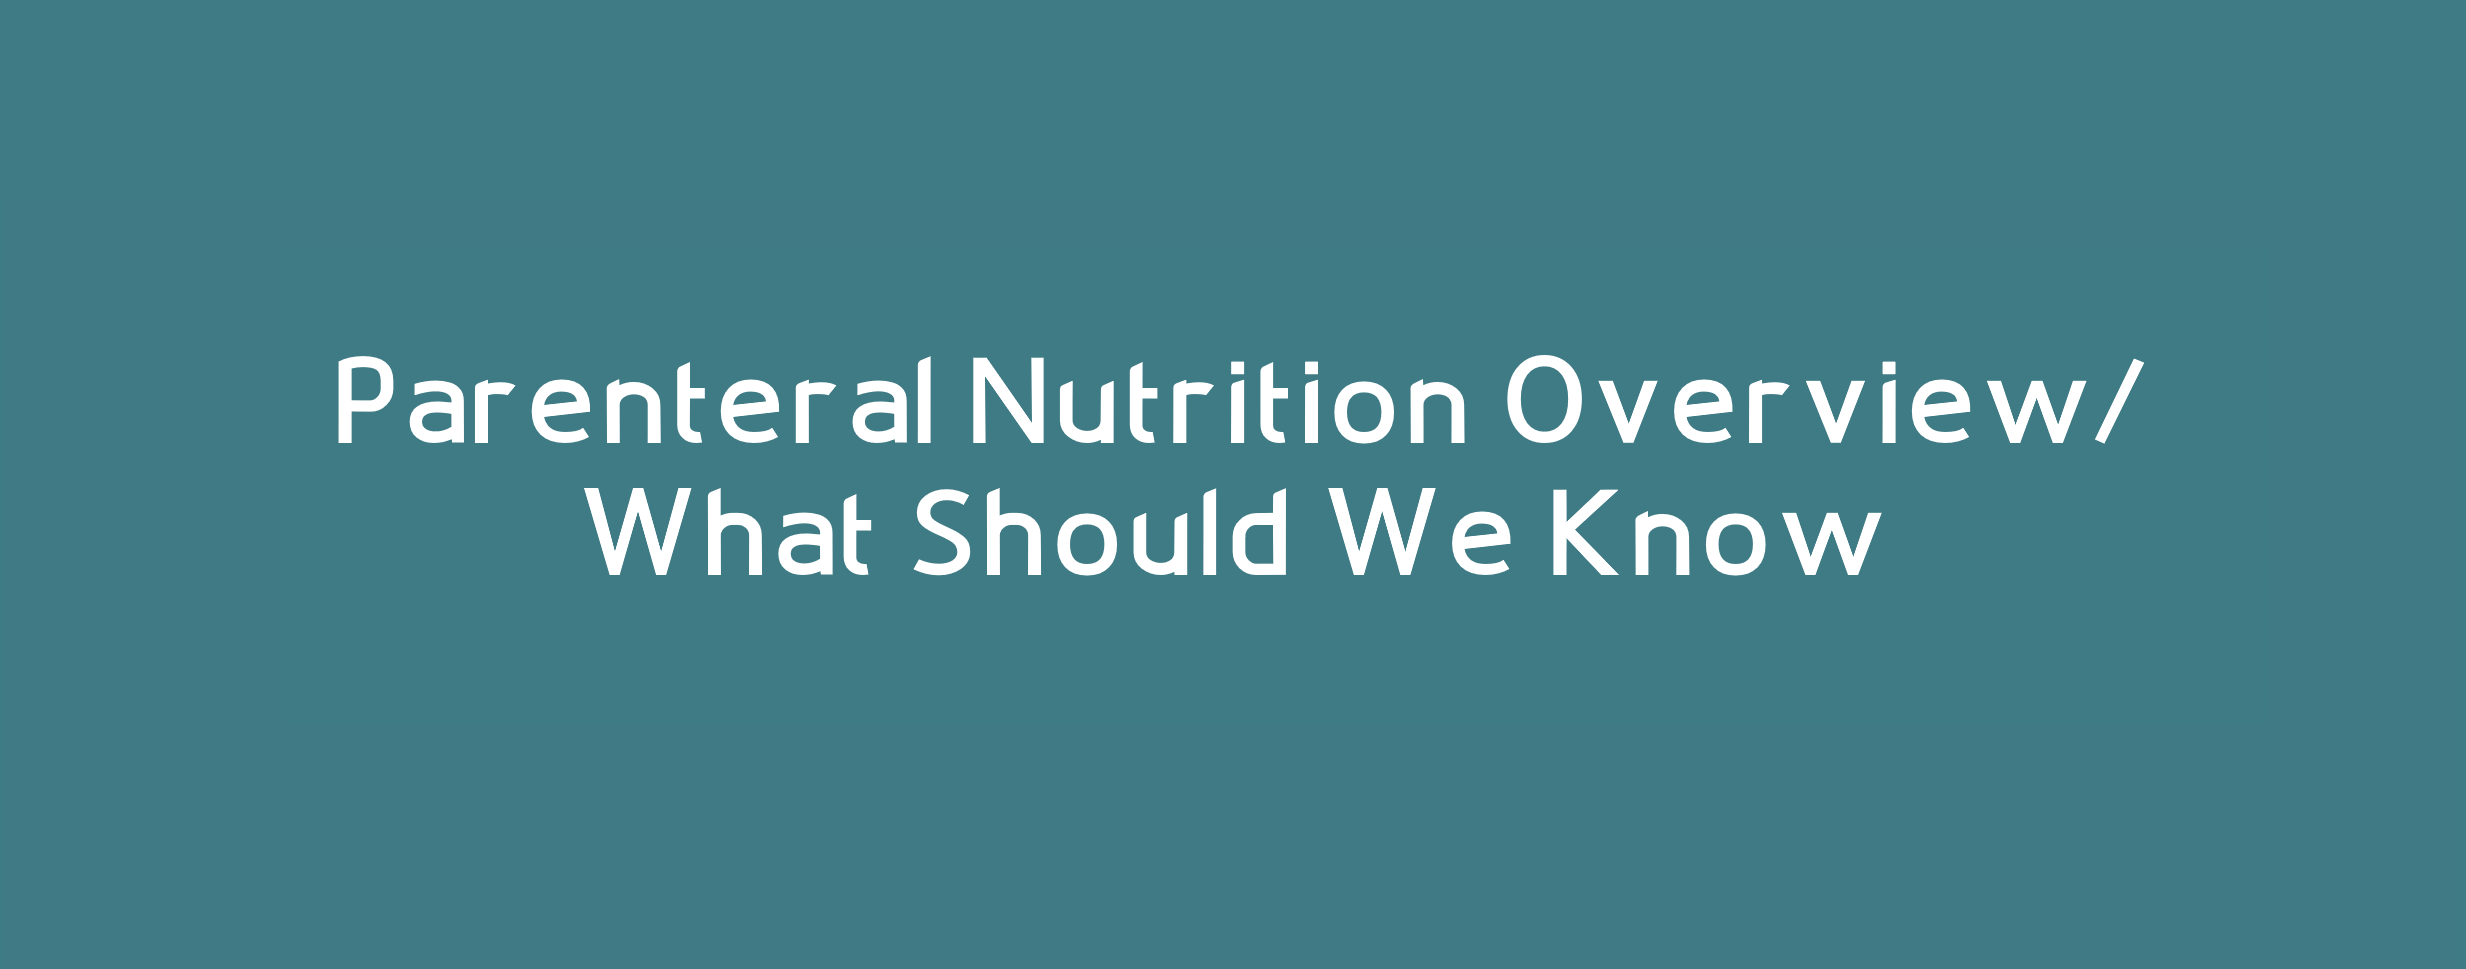 Parenteral Nutrition Overview/ What Should We Know